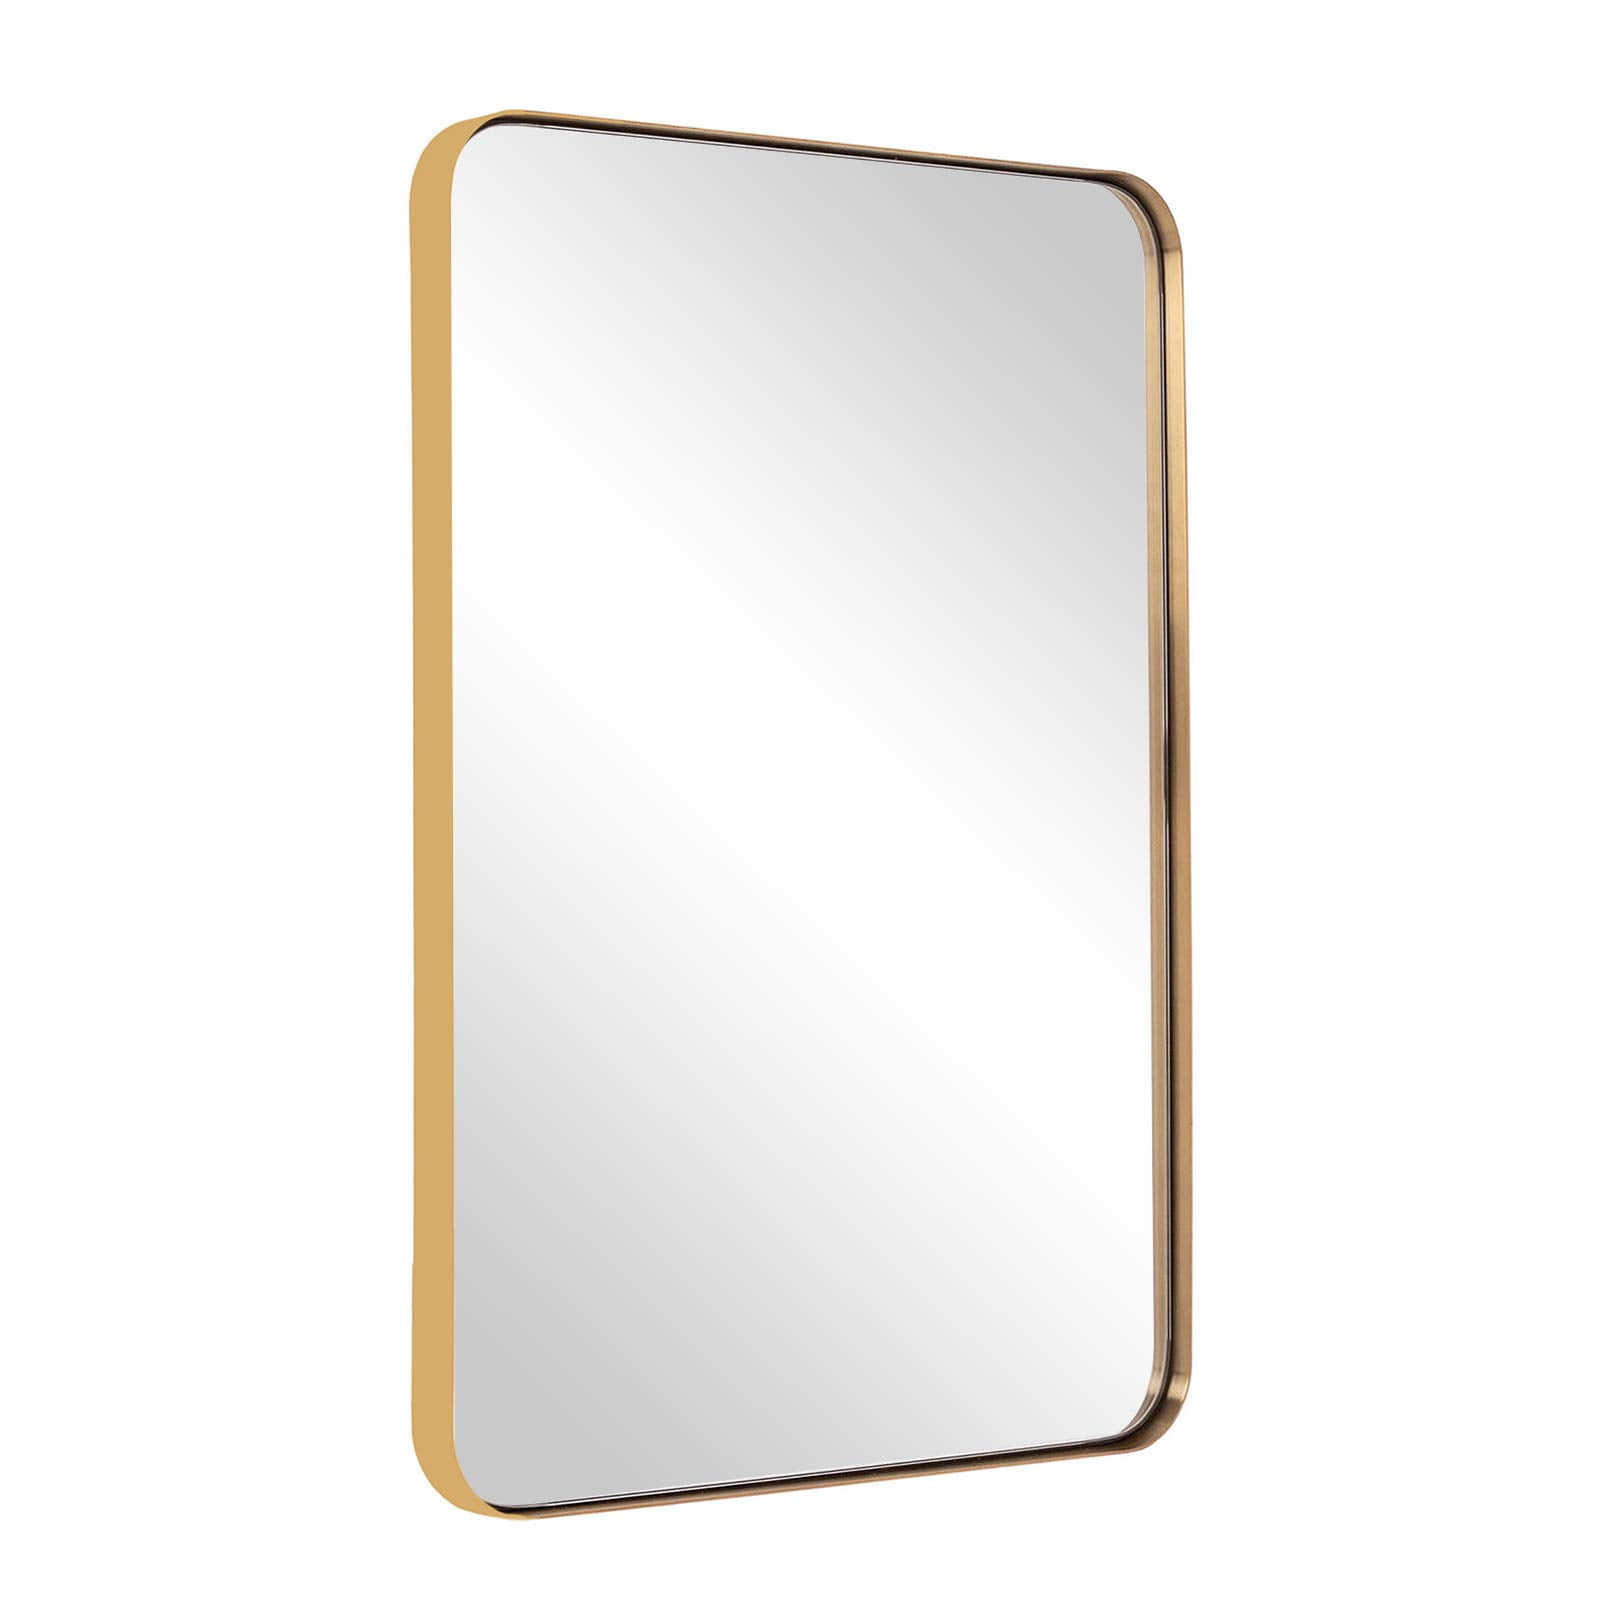 Andy Star Gold Wall Mirror 24x36 Inch, Rectangle Mirror With Curved Edges